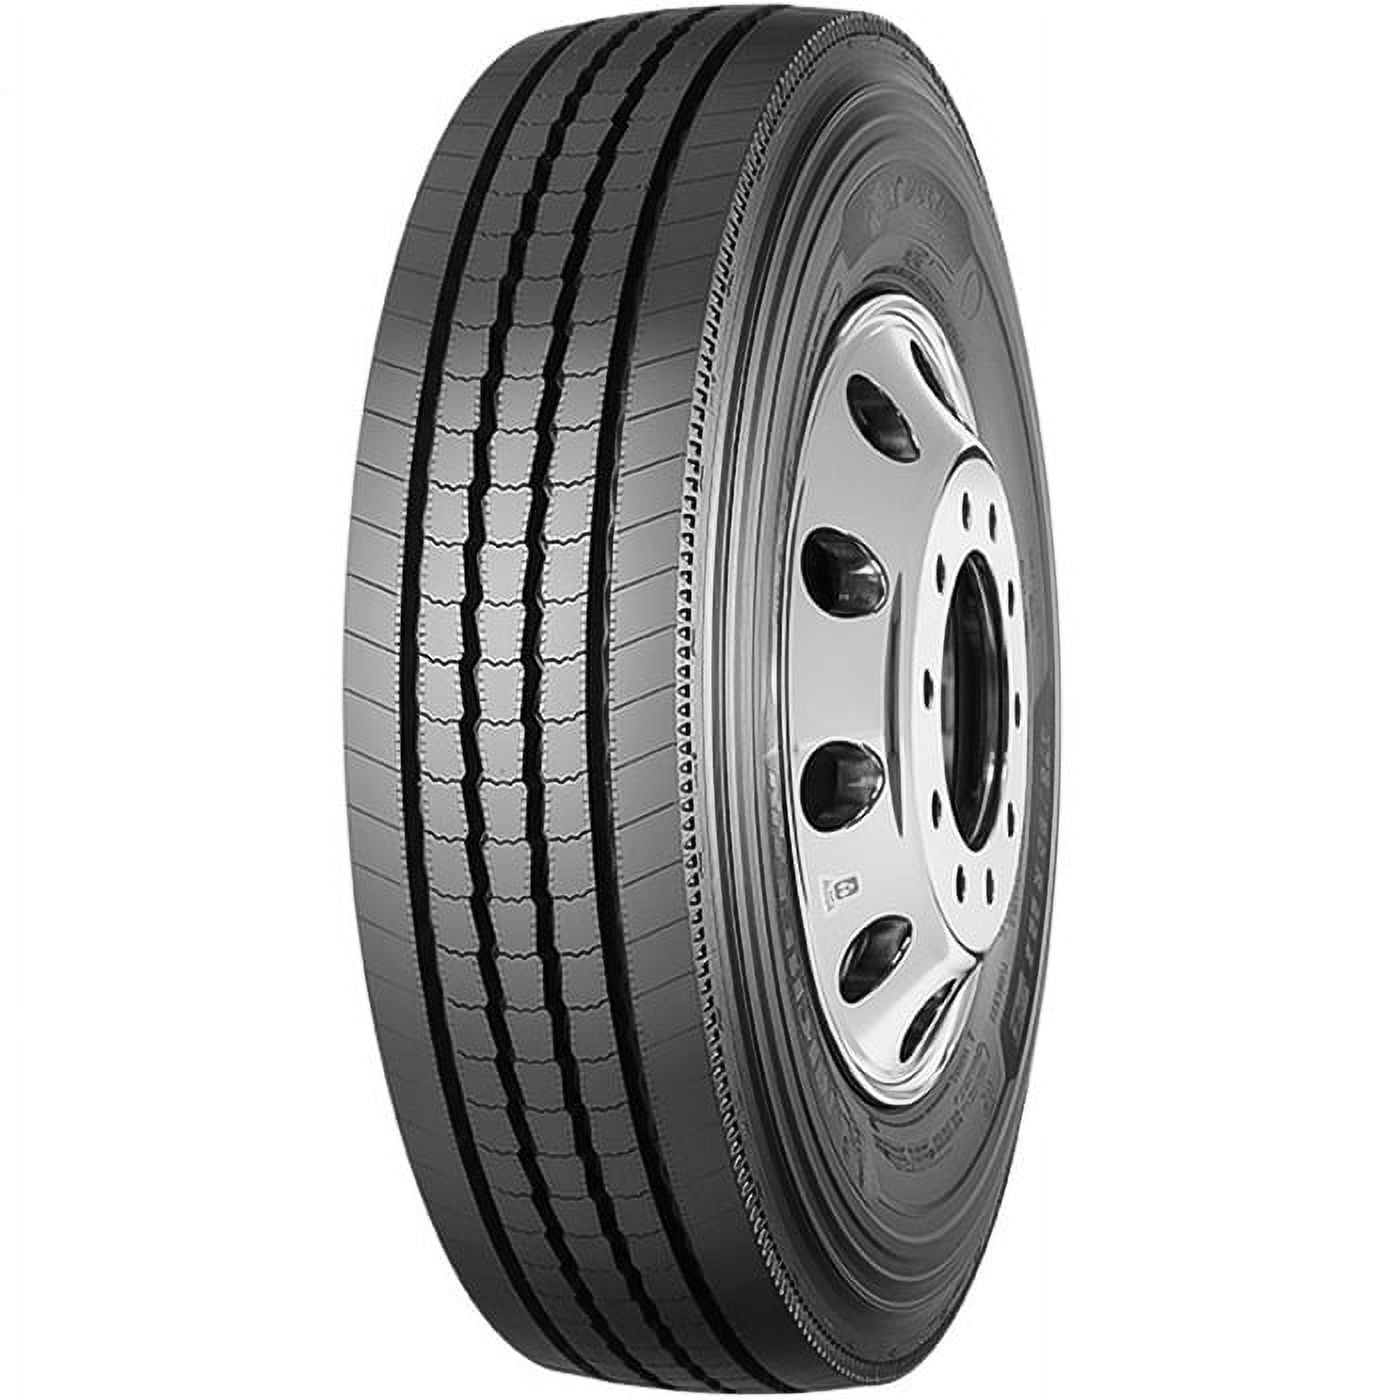 Michelin X Multi Z 275/70R22.5 Load J 18 Ply All Position Commercial Tire